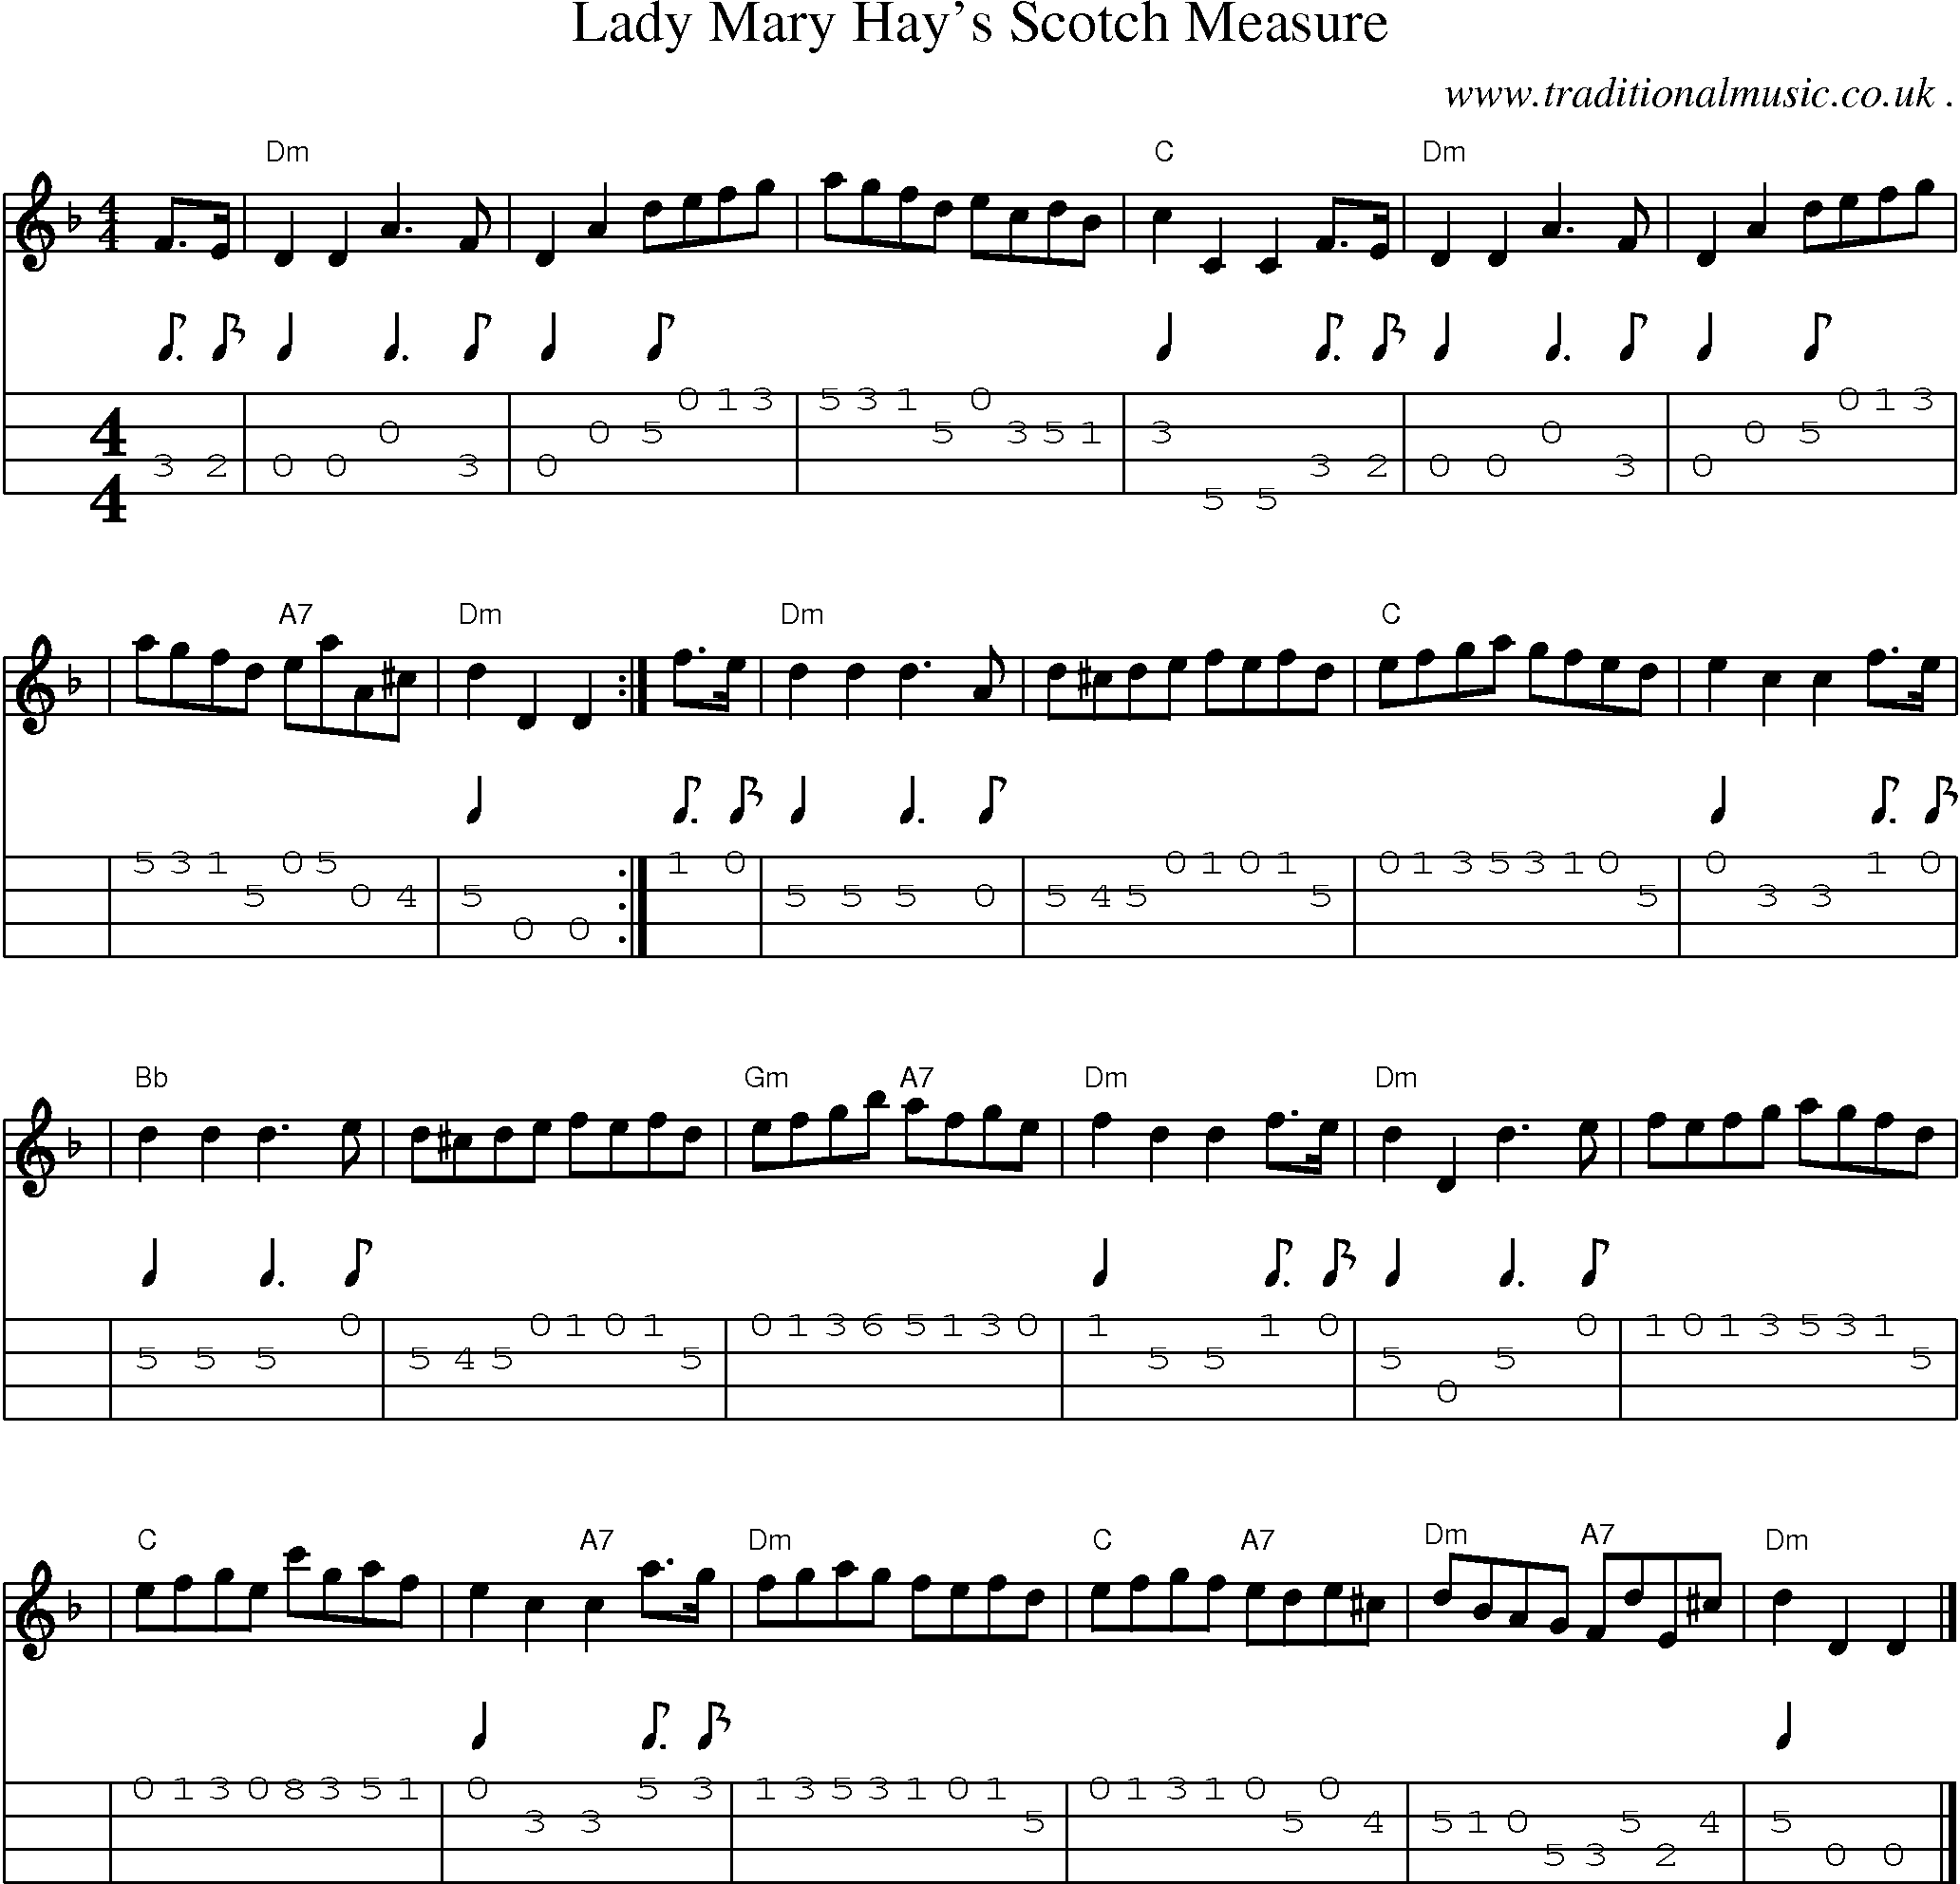 Sheet-music  score, Chords and Mandolin Tabs for Lady Mary Hays Scotch Measure